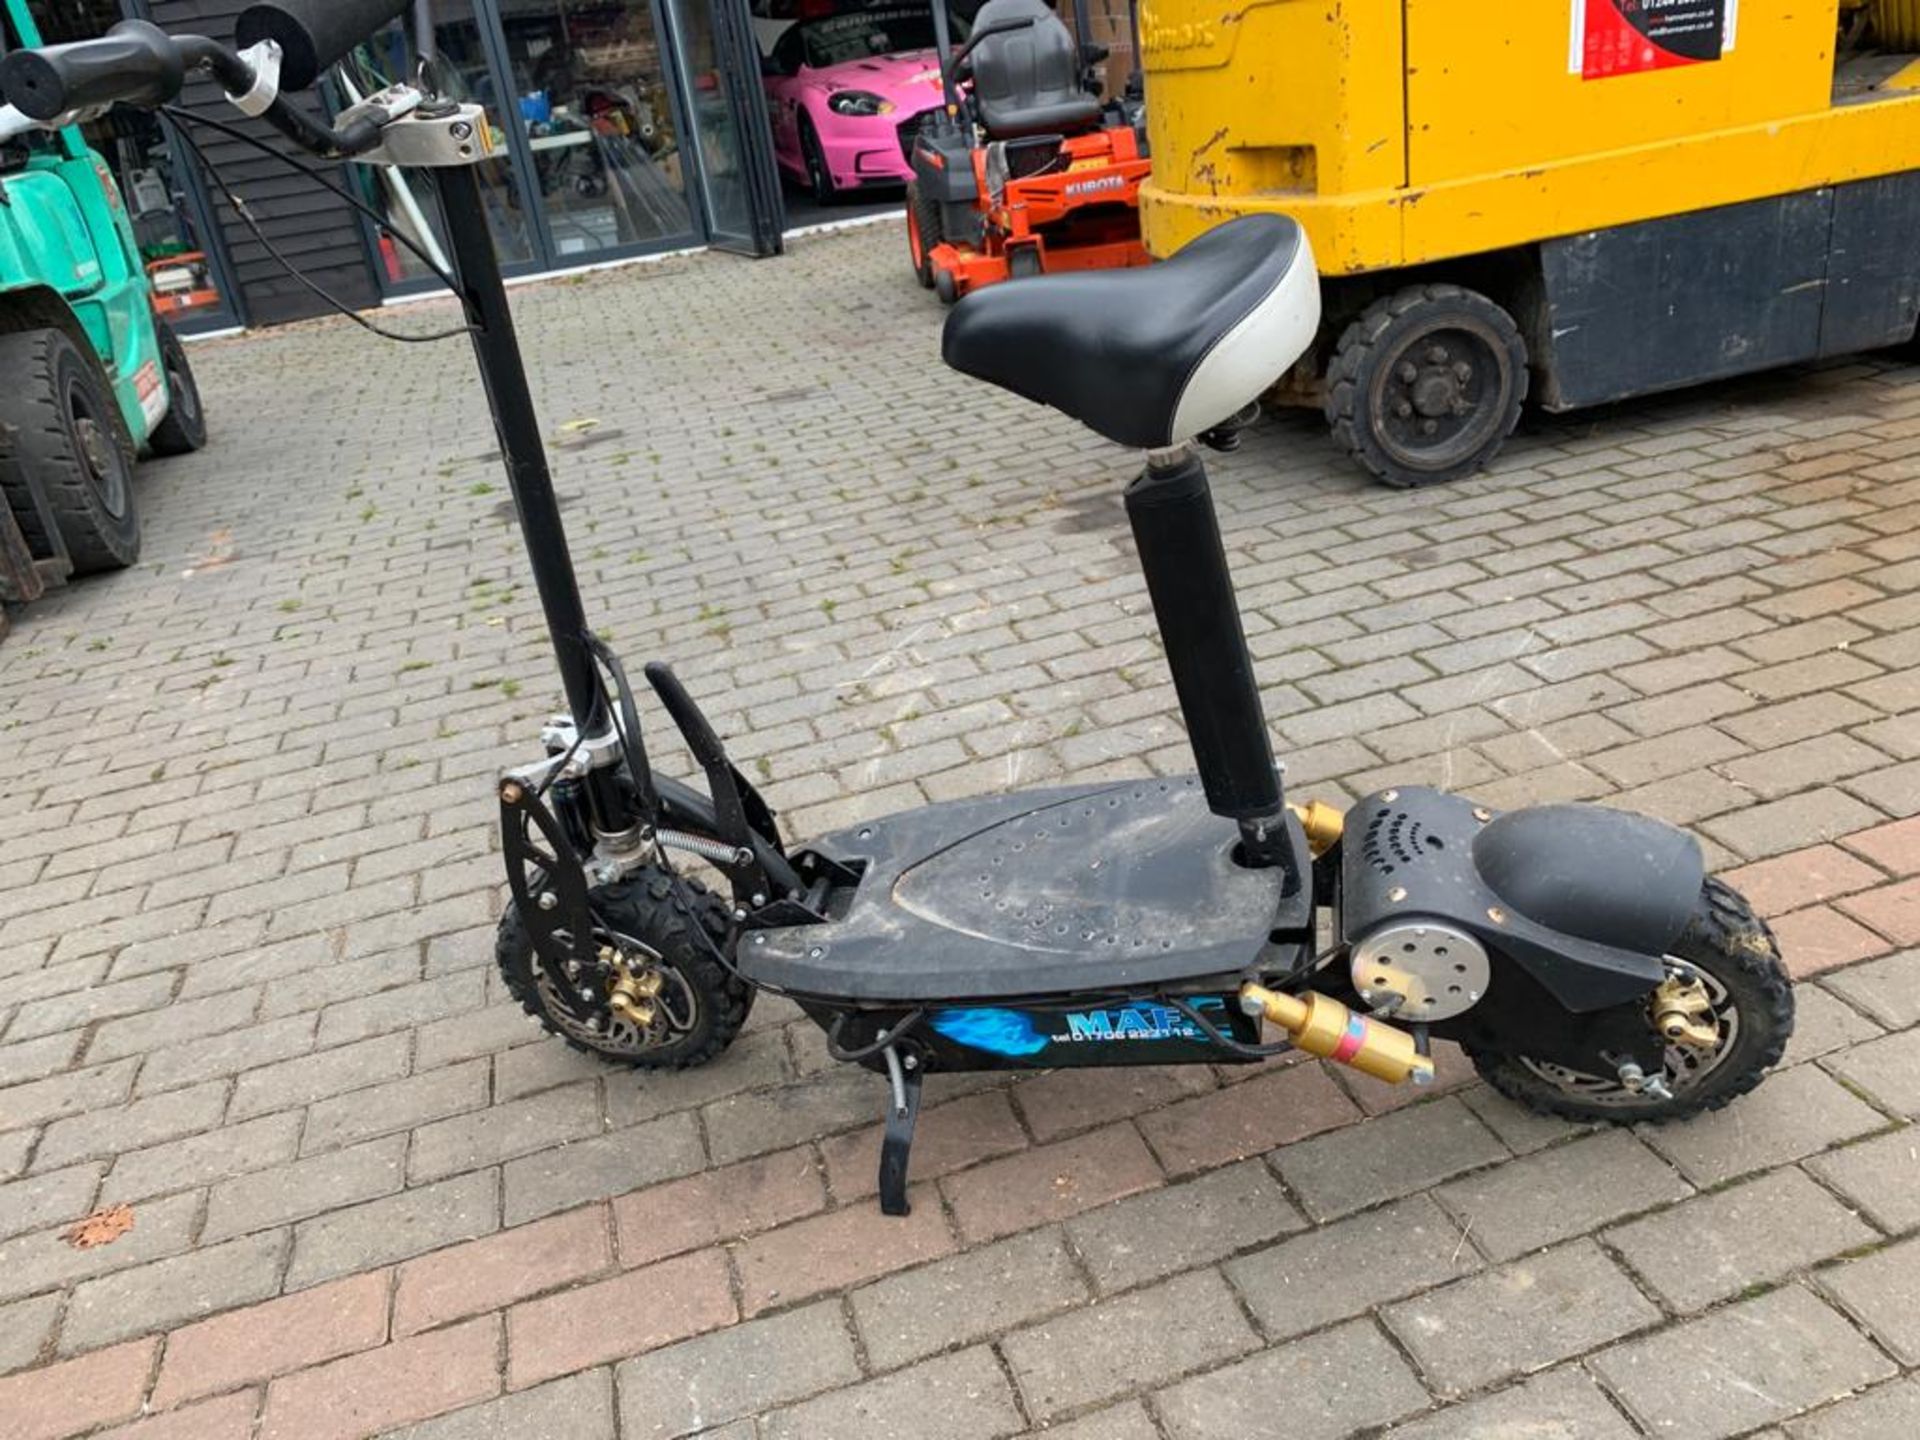 2000W ELECTRIC POWERED RIDE ON SCOOTER, YEAR 2018, IN GOOD ORDER, C/W CHARGER *PLUS VAT* - Image 2 of 2